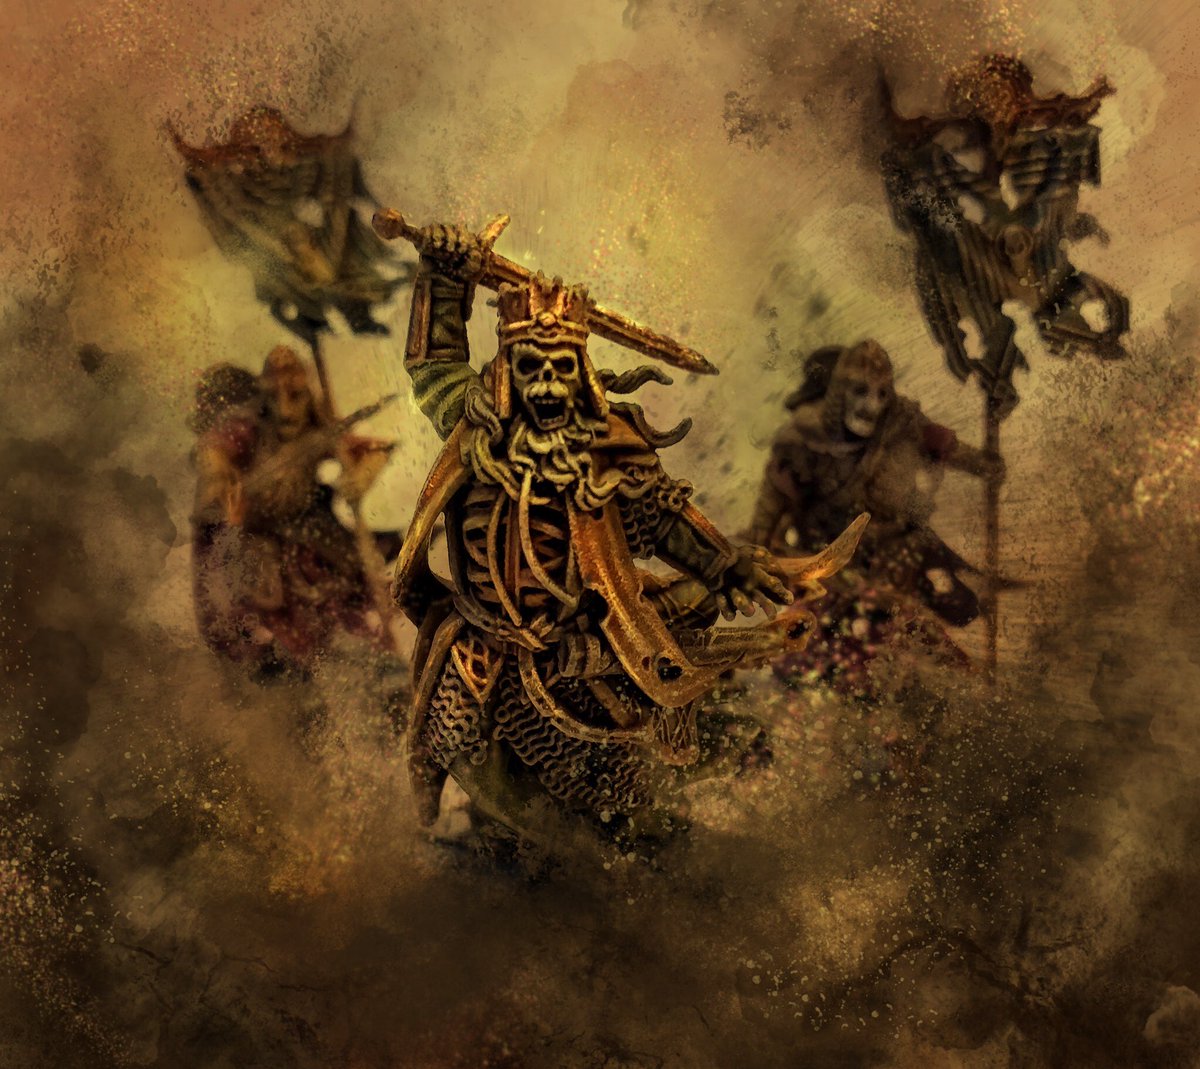  @Korvaks_Saga leading the dark charge!No pressure to join I’m just including Patreon link in these for exposure.  http://patreon.com/user?u=32948226  #artistsempire  #warhammercommunity